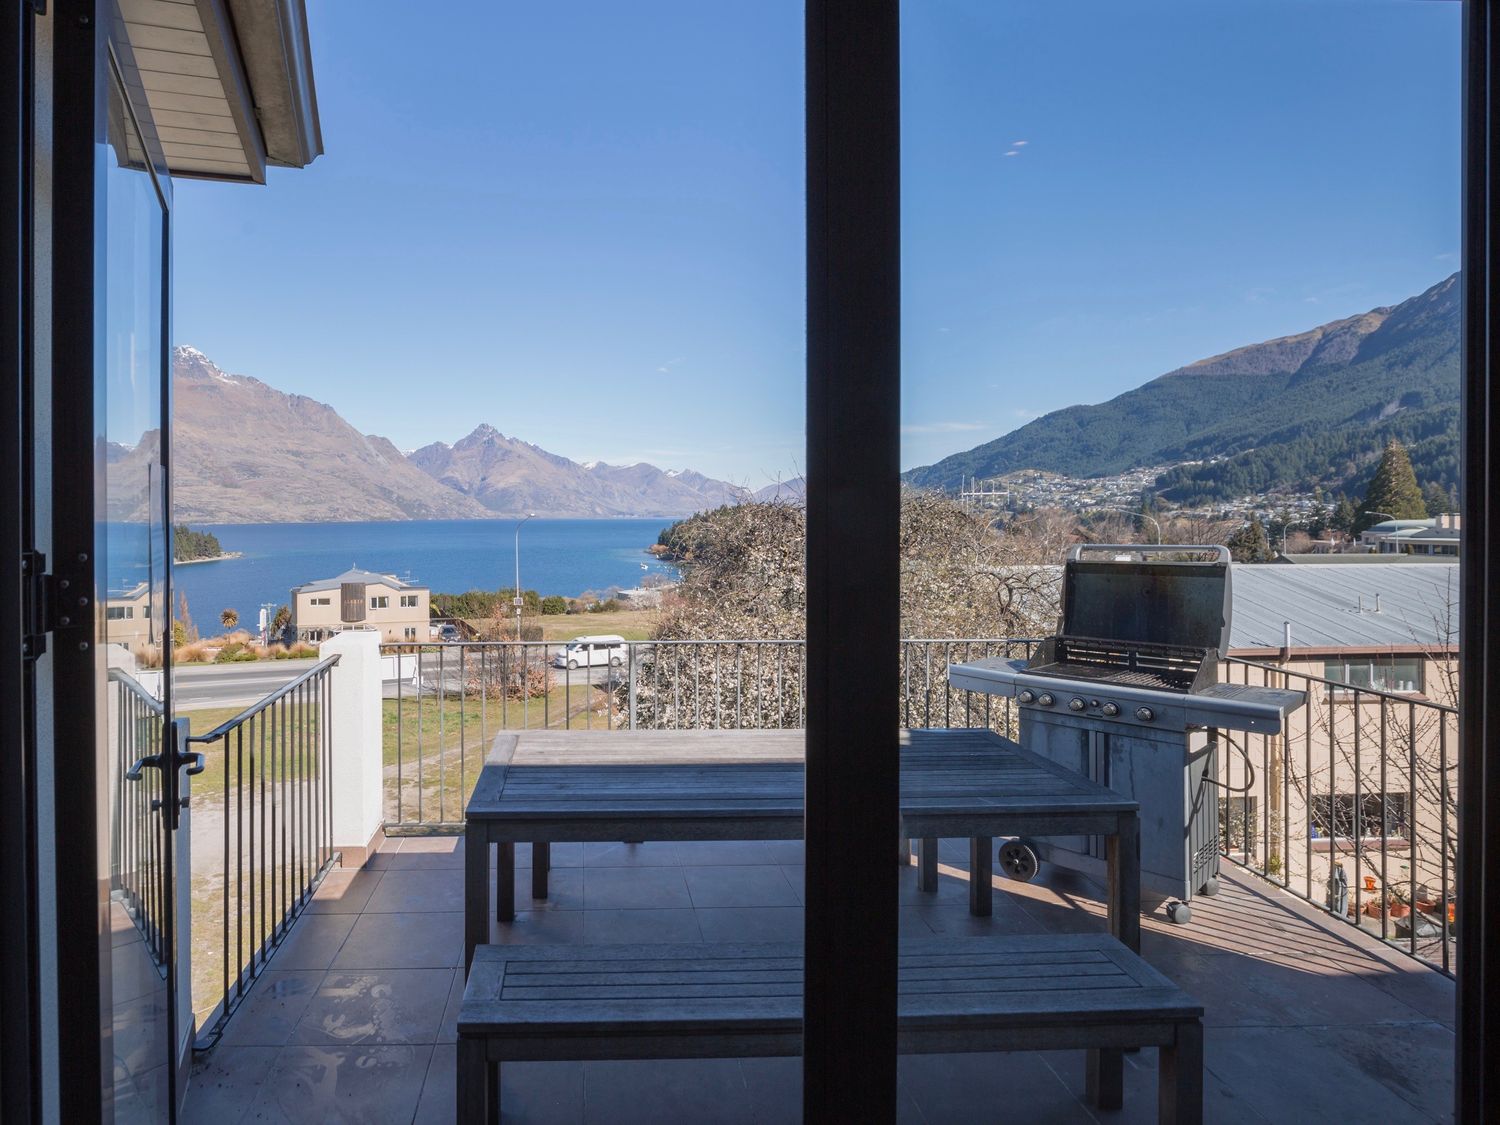 Lake and Mountain Ridge - Queenstown Apartment (Unit A) -  - 1031584 - photo 1